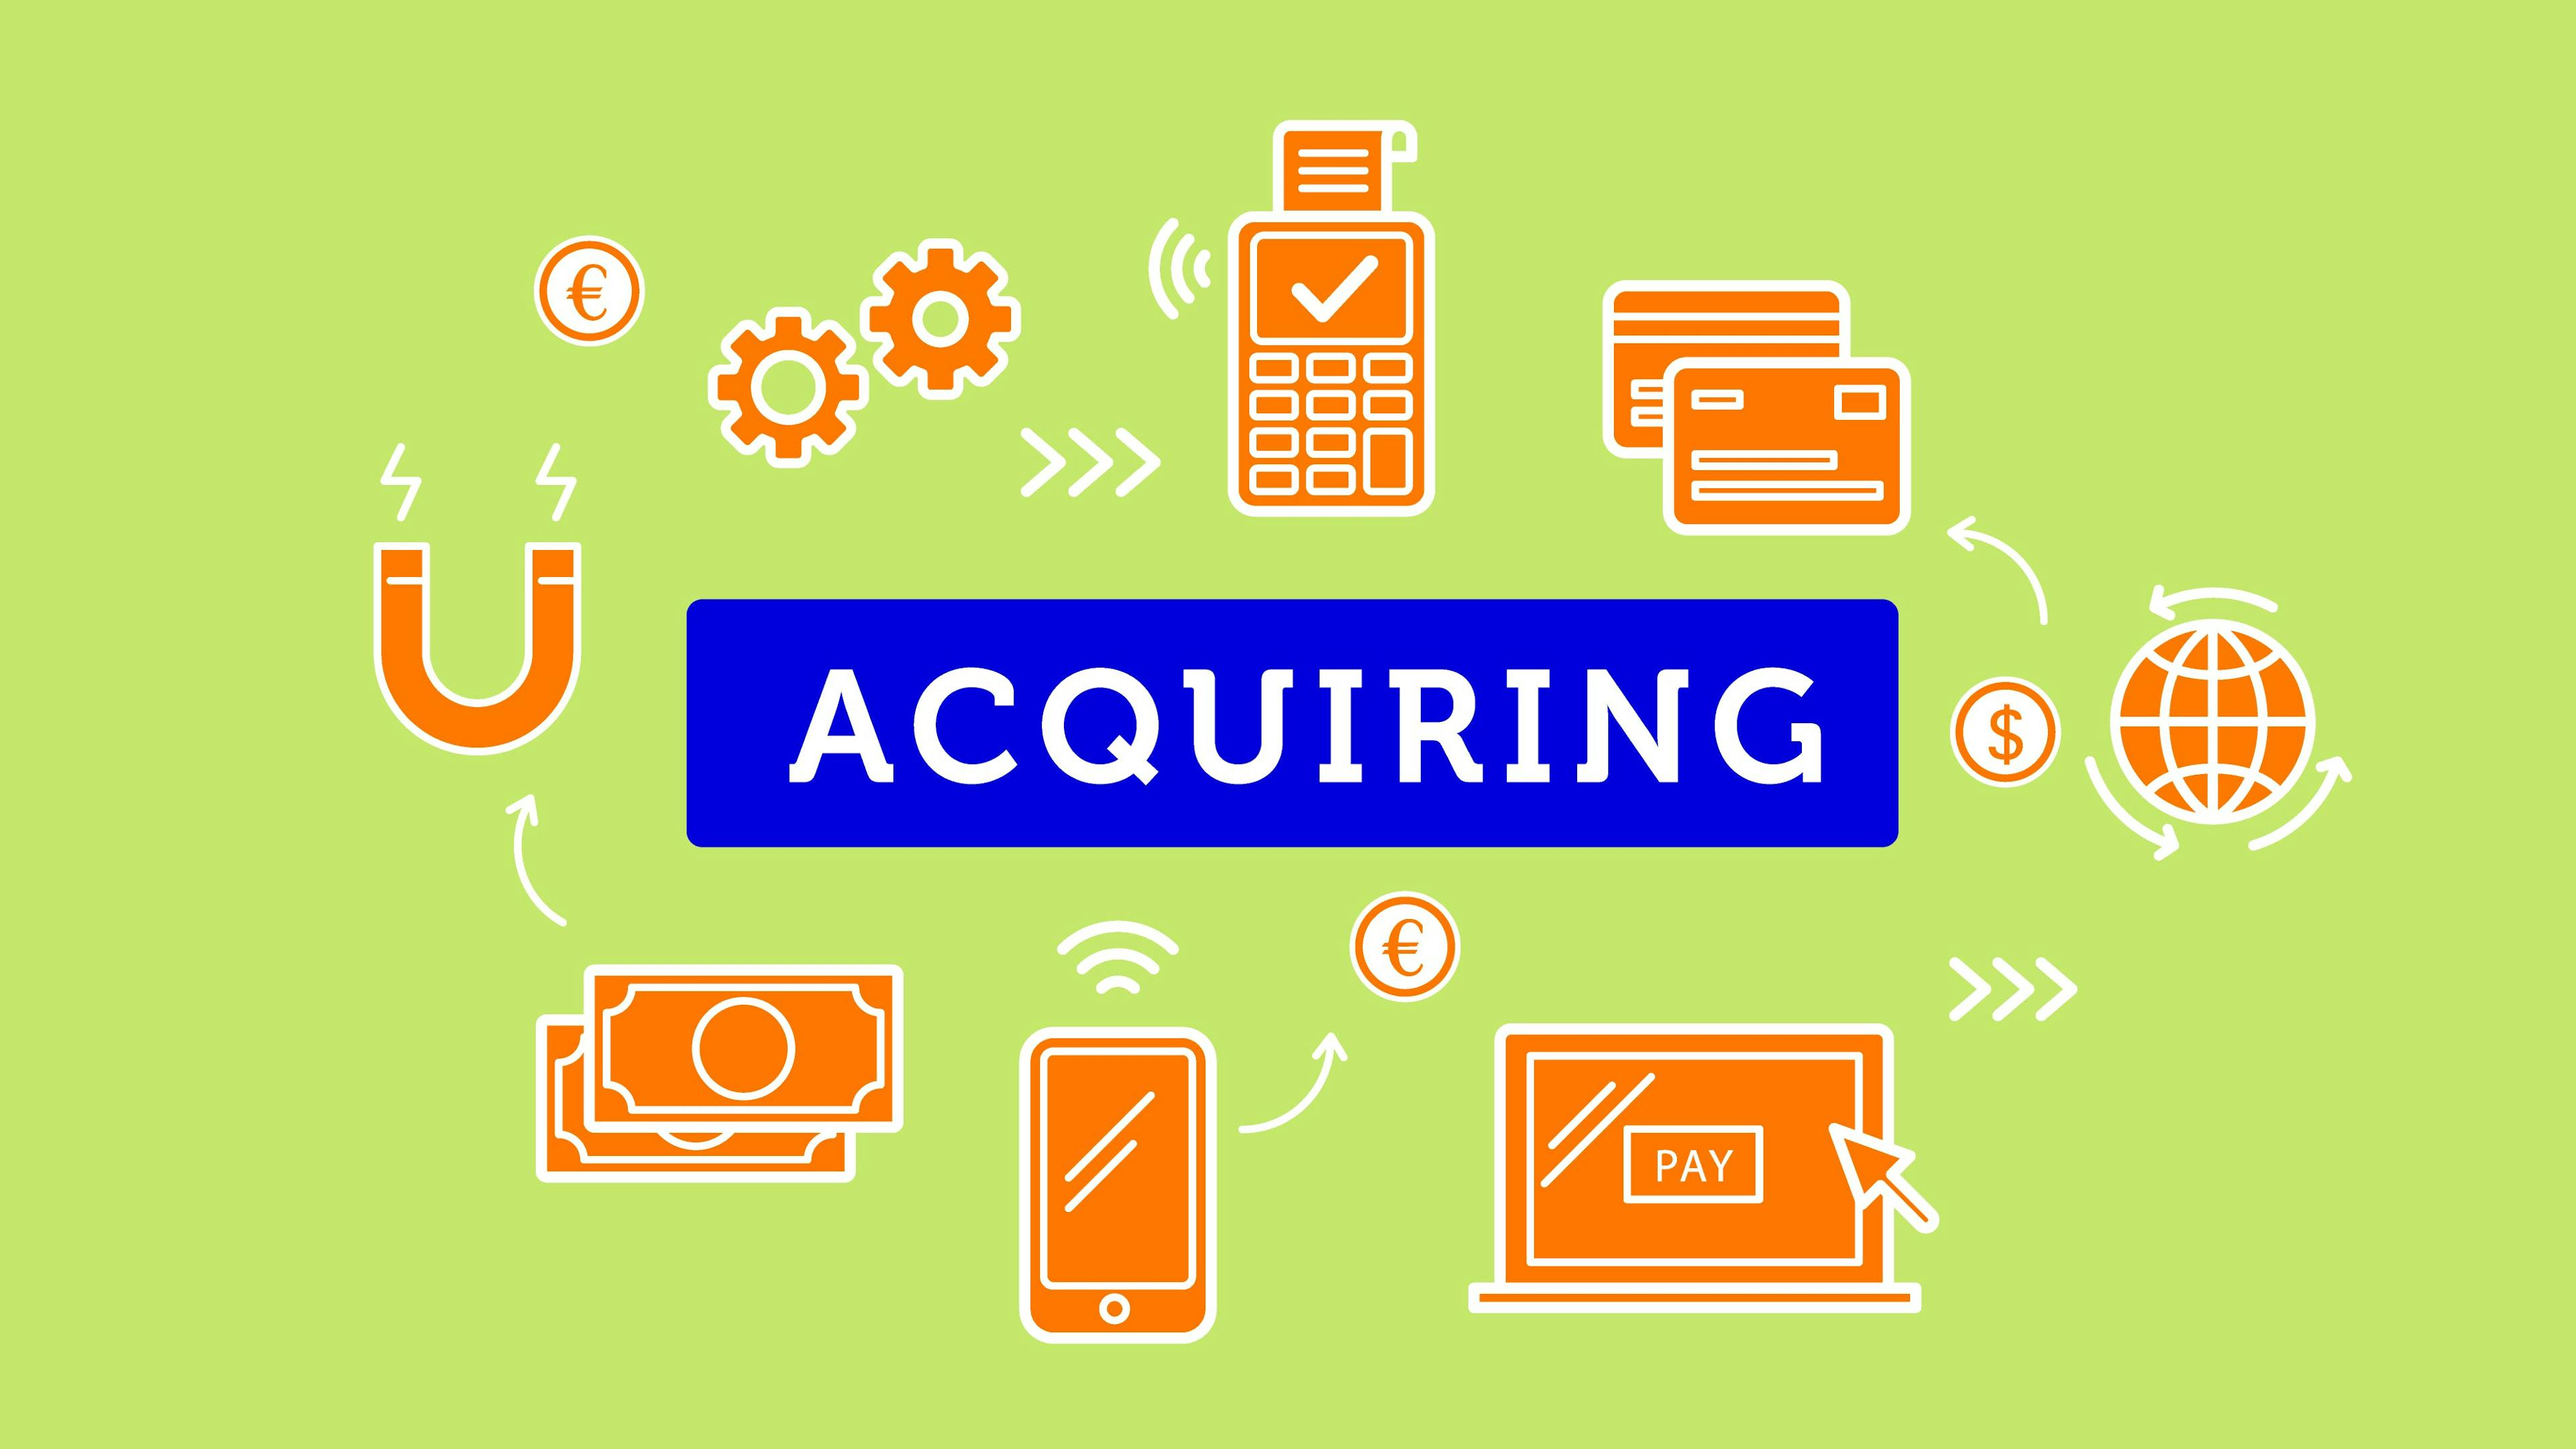 What is an acquiring bank and its role in the payment process